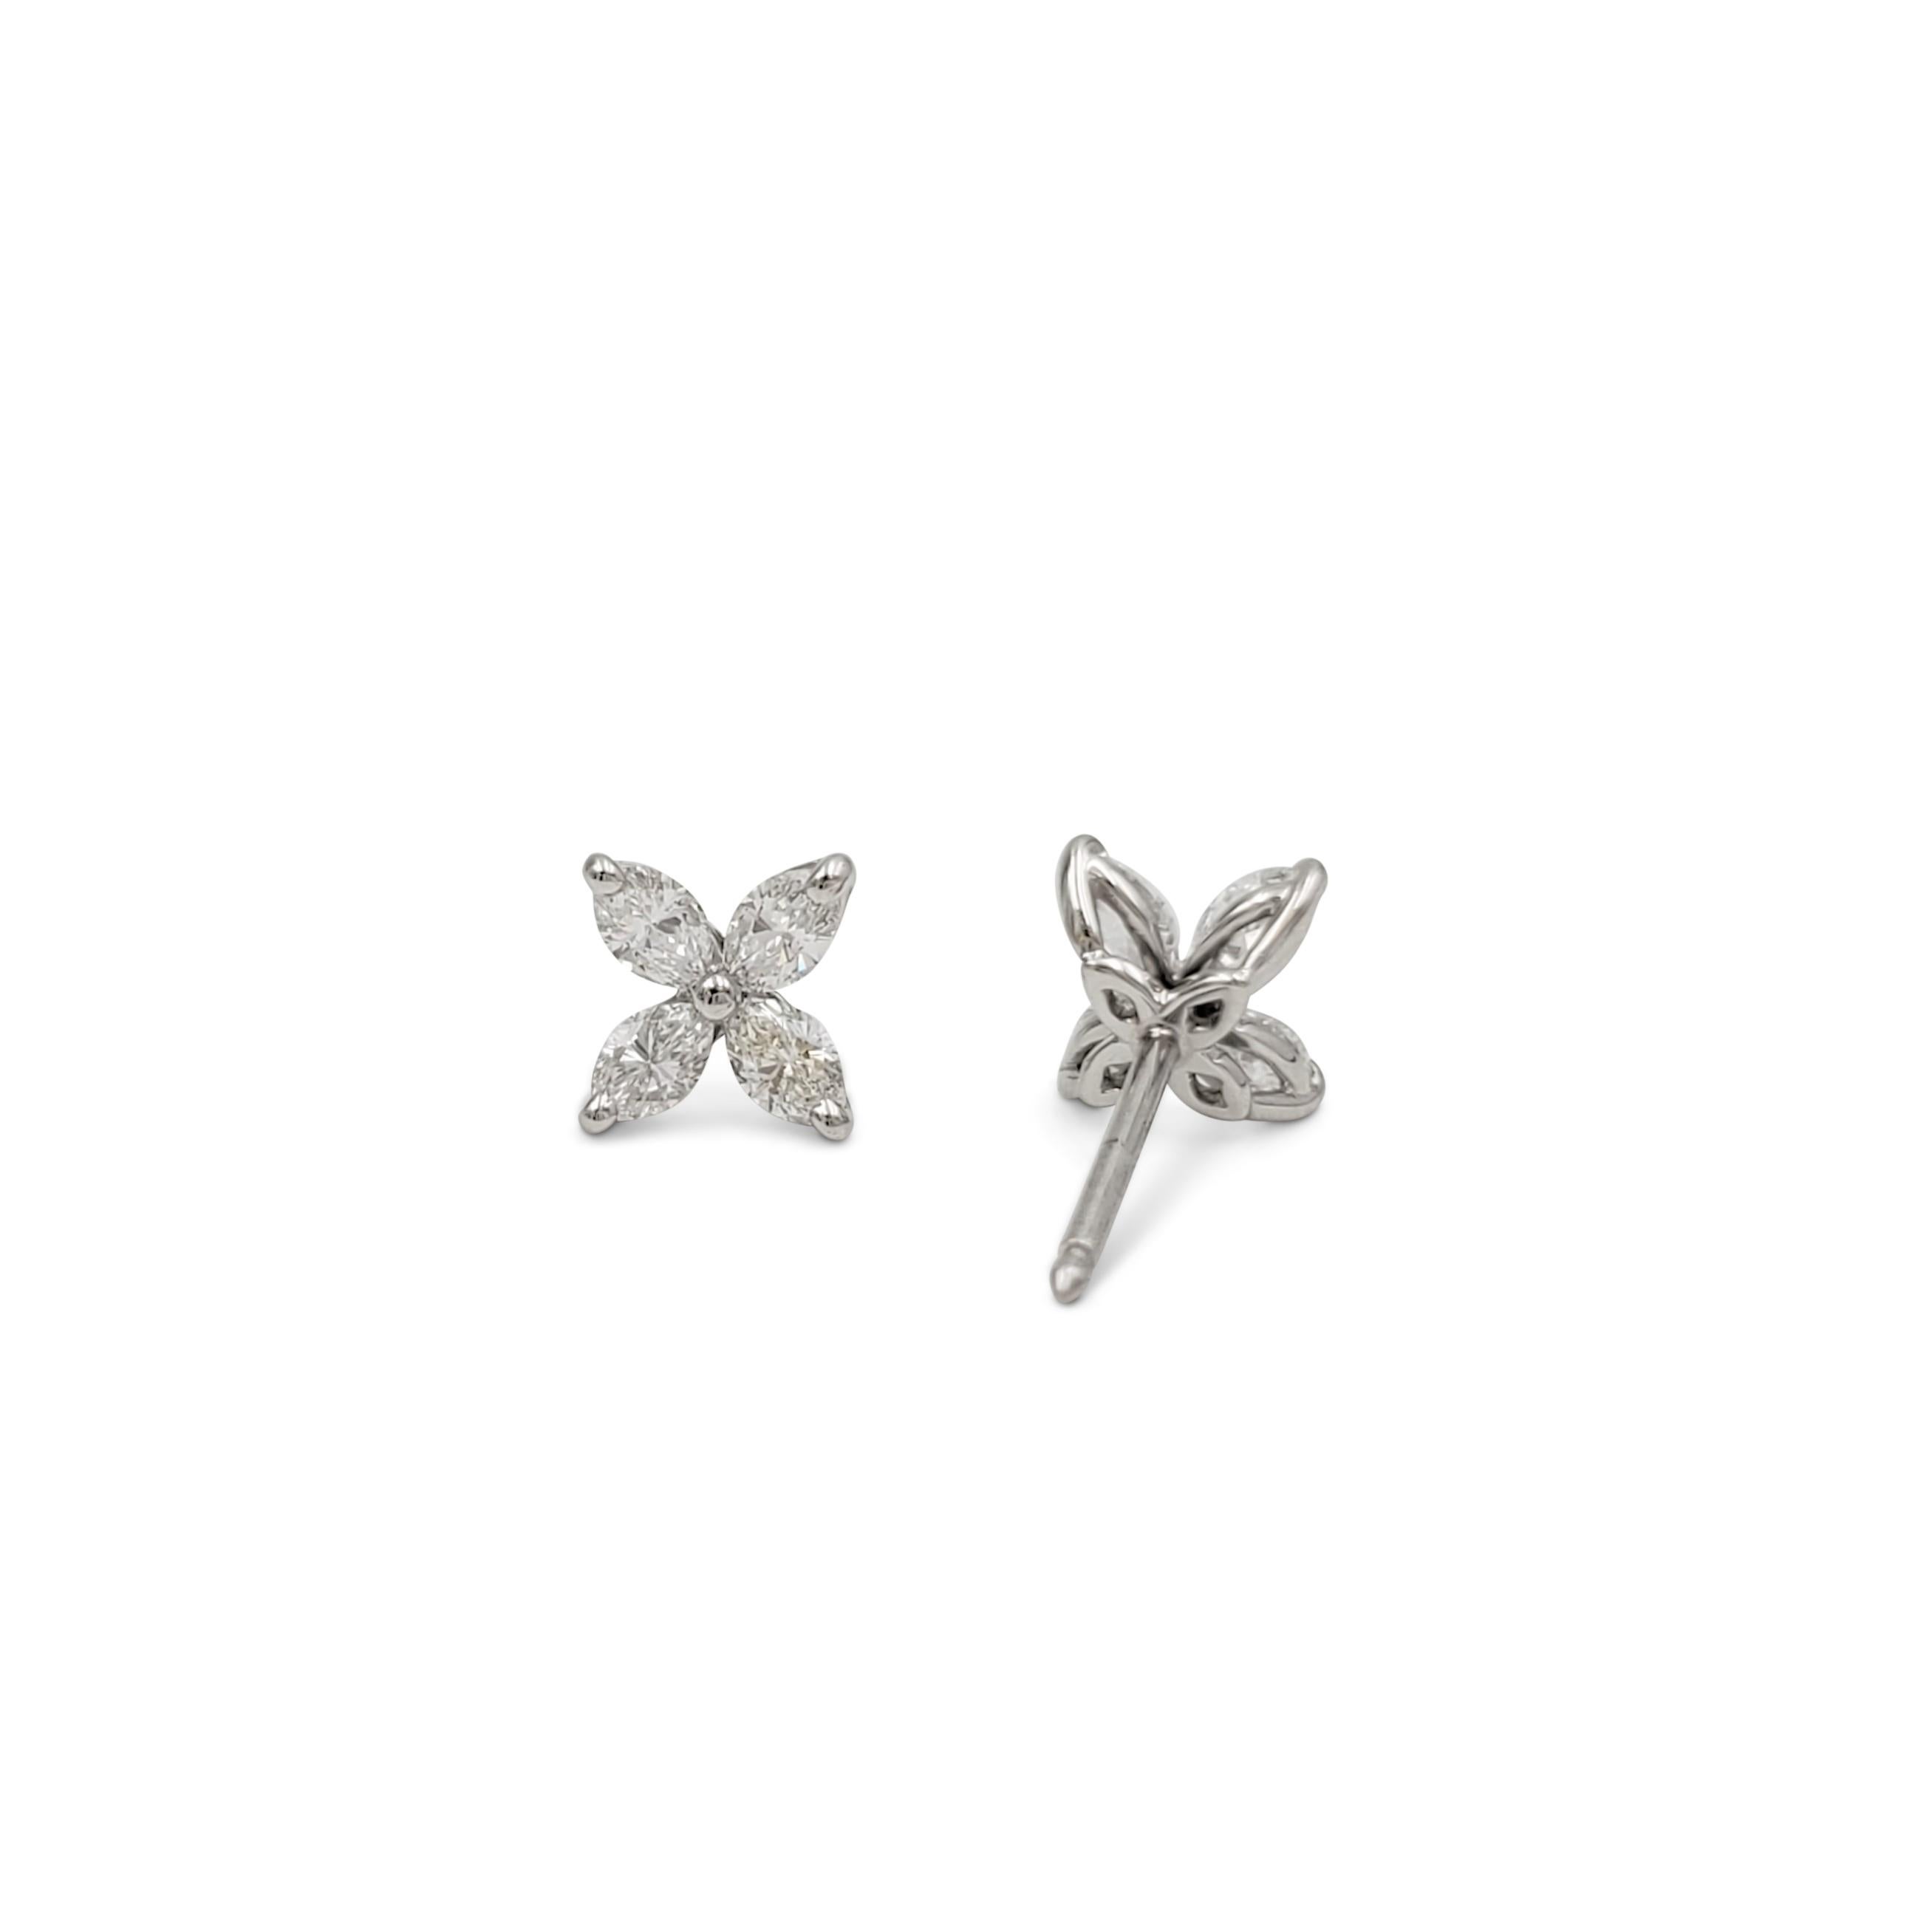 Authentic classic Tiffany & Co. 'Victoria' earrings crafted in platinum and set with an estimated 0.19 carats total weight of radiant marquise-cut diamonds (E-F, VS). Signed Tiffany & Co., PT 950. The earrings are not presented with the original box